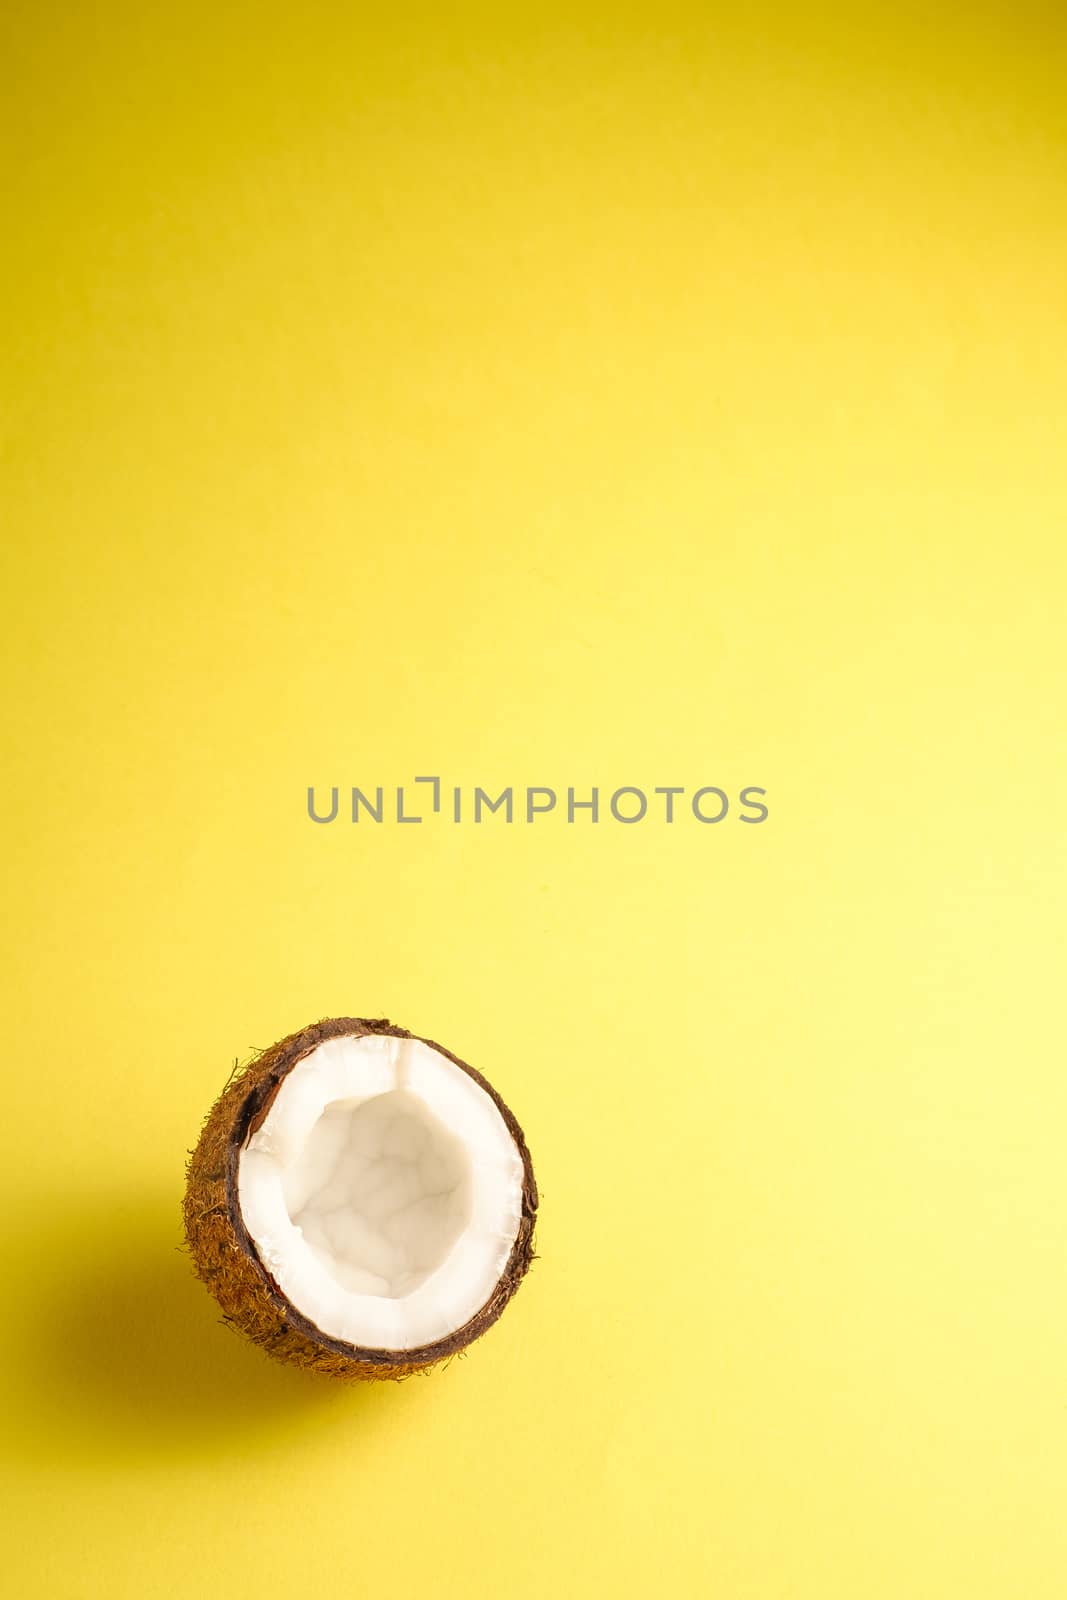 Single coconut fruit on yellow plain background, abstract food tropical concept, angle view copy space